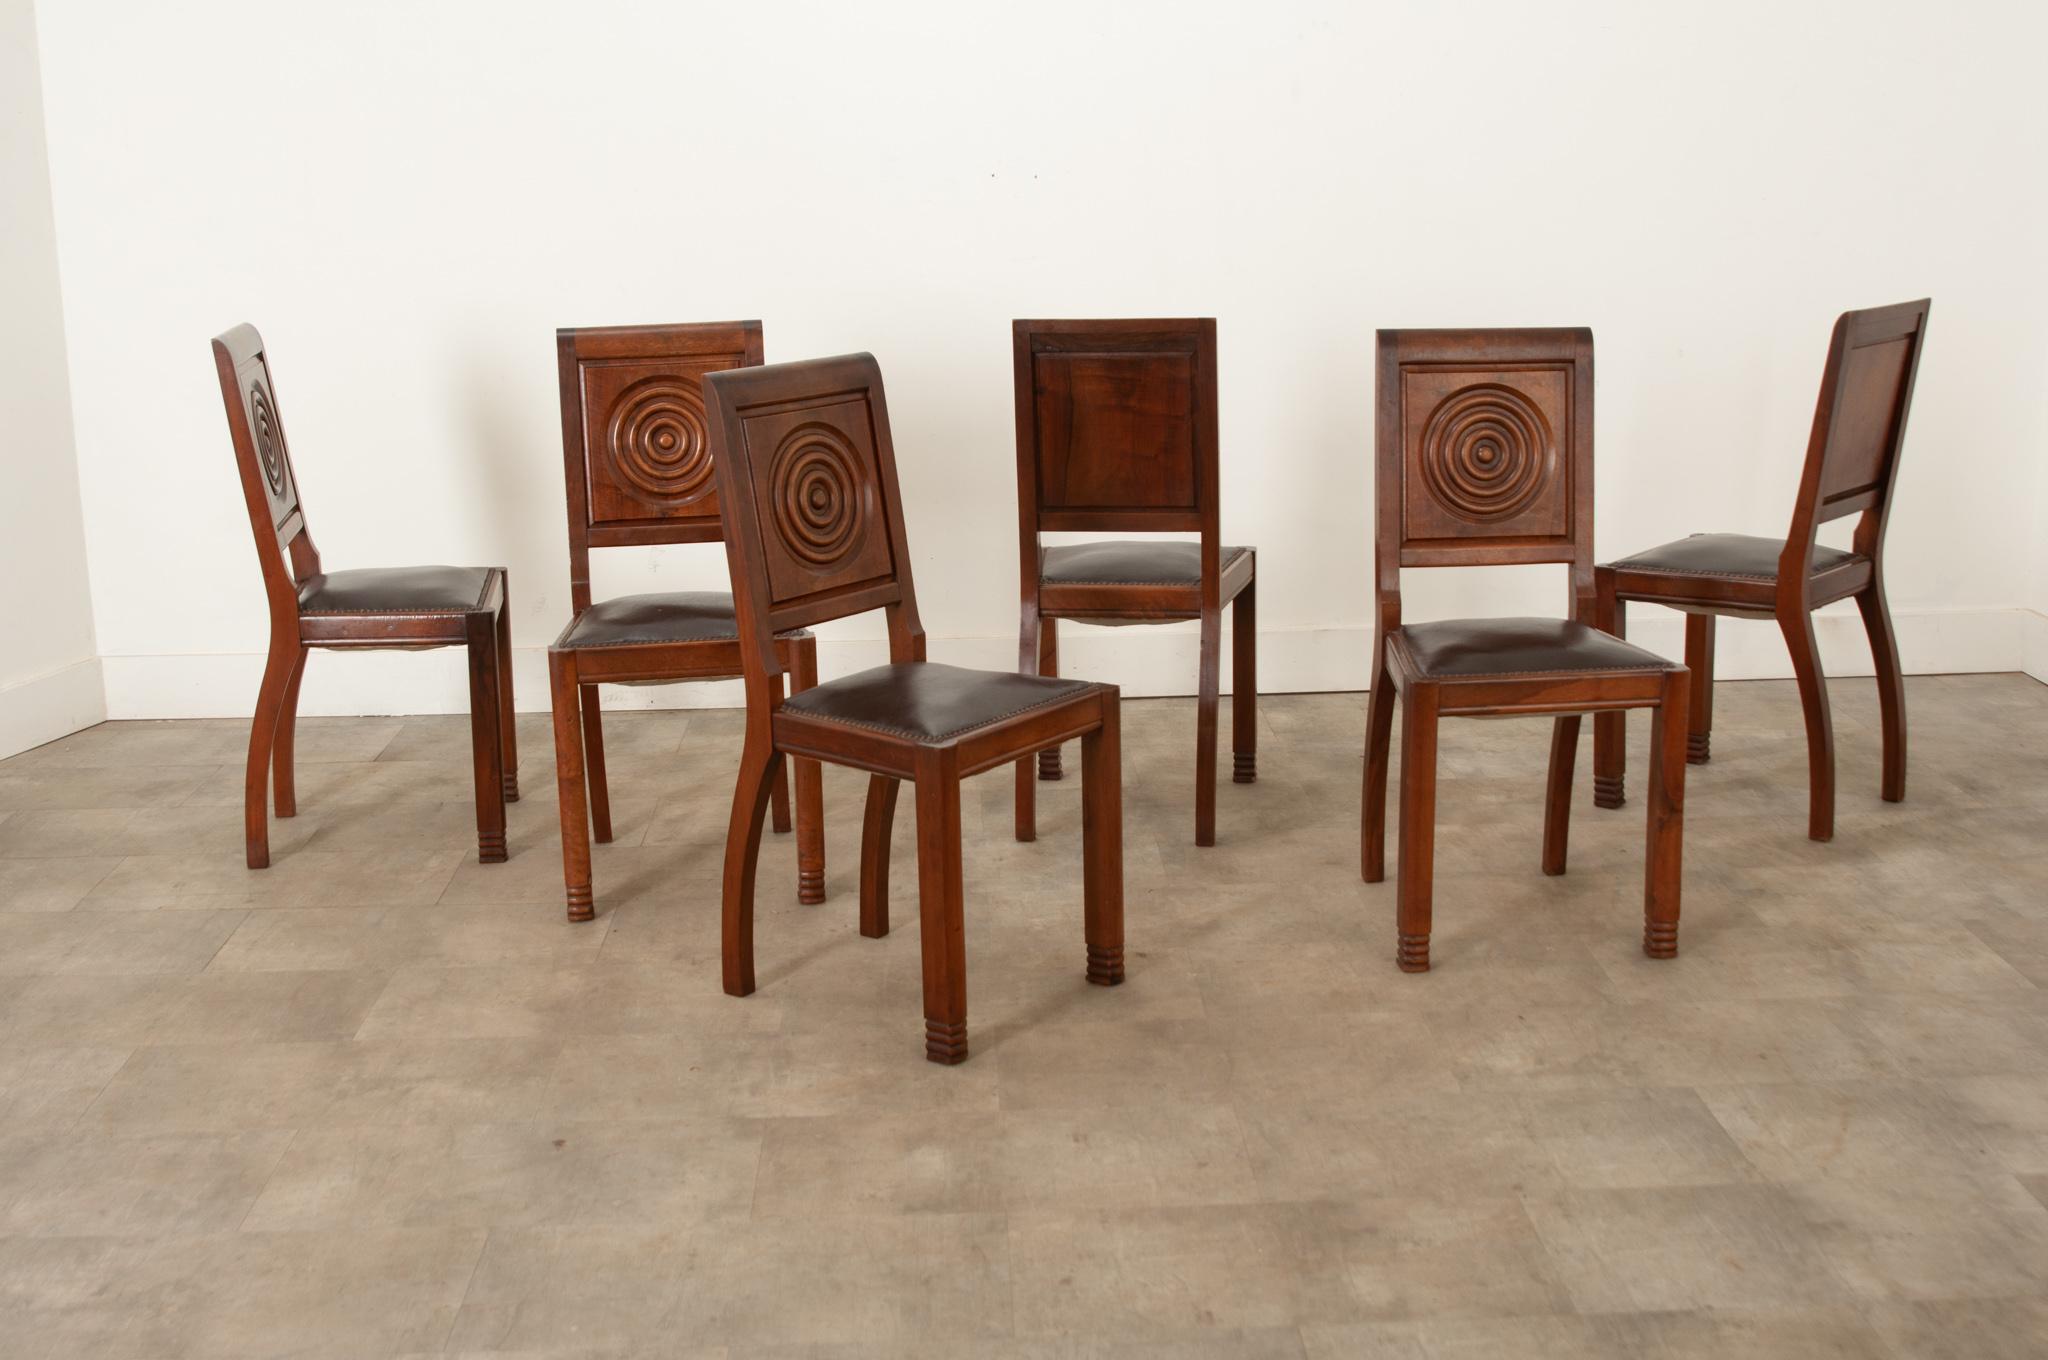 A French set of six impressive Art Deco dining chairs made of solid walnut frames. The detailed and geometric carvings on the backrest panels are very appealing and would meet the standards of the most demanding interiors with elegance and daring.